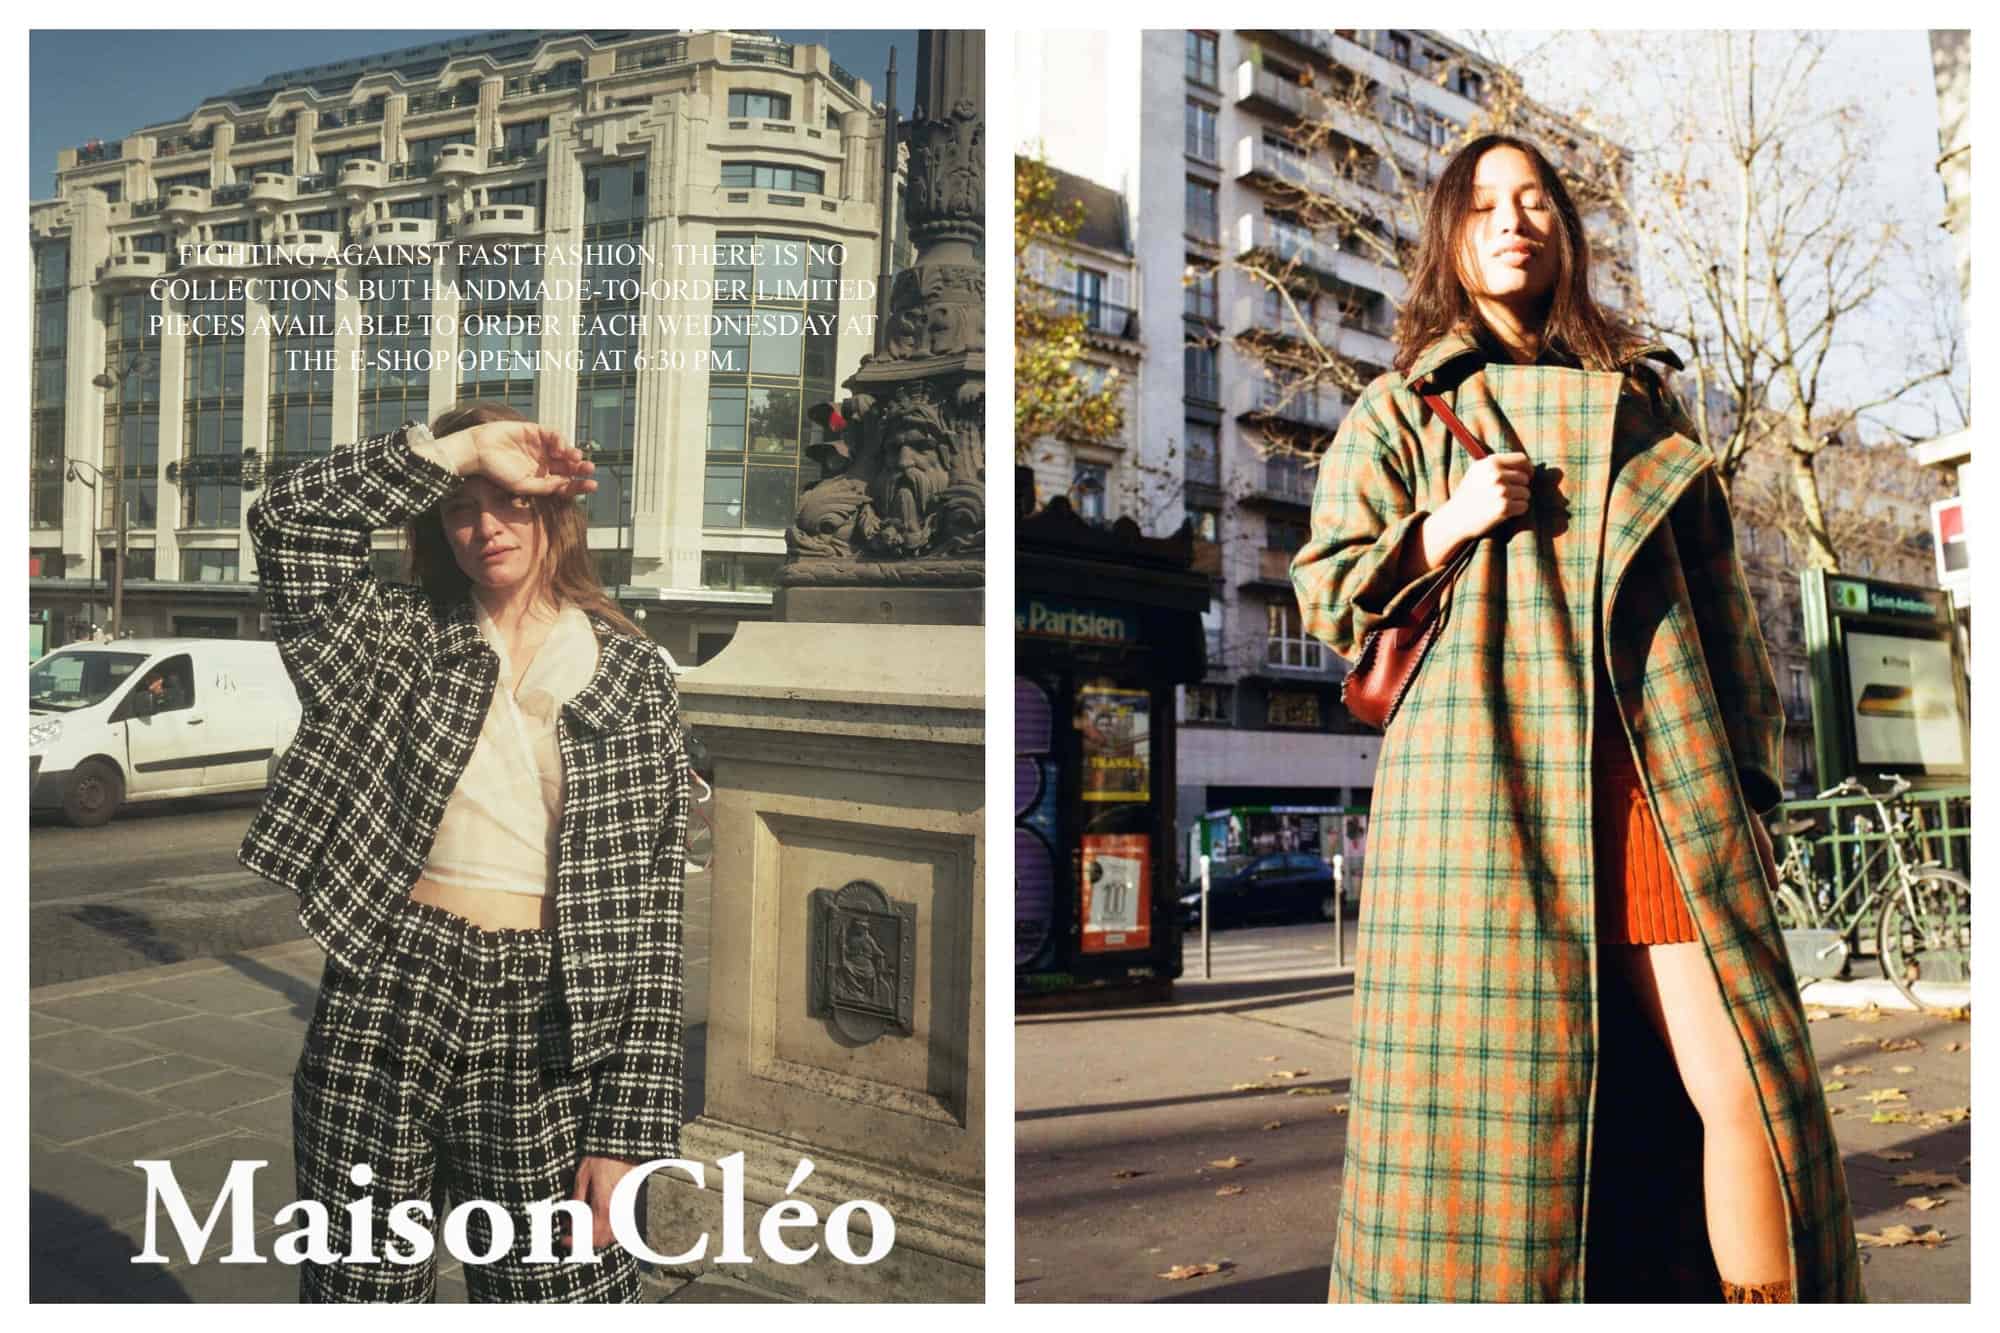 2 photos from a sustainable fashion brand called MaisonCléo. Left: A woman stands in a Parisian street with her hand up in her face to shield her eyes from the strong sun. She is wearing a white long sleeved top and 
a matching black and white printed blazer and pants. Behind her is a white SUV truck and a building. Right: A model is posing, with eyes closed, beside a Parisian metro station, in her checkered orange and green coat, orange bag, and orange dress. 